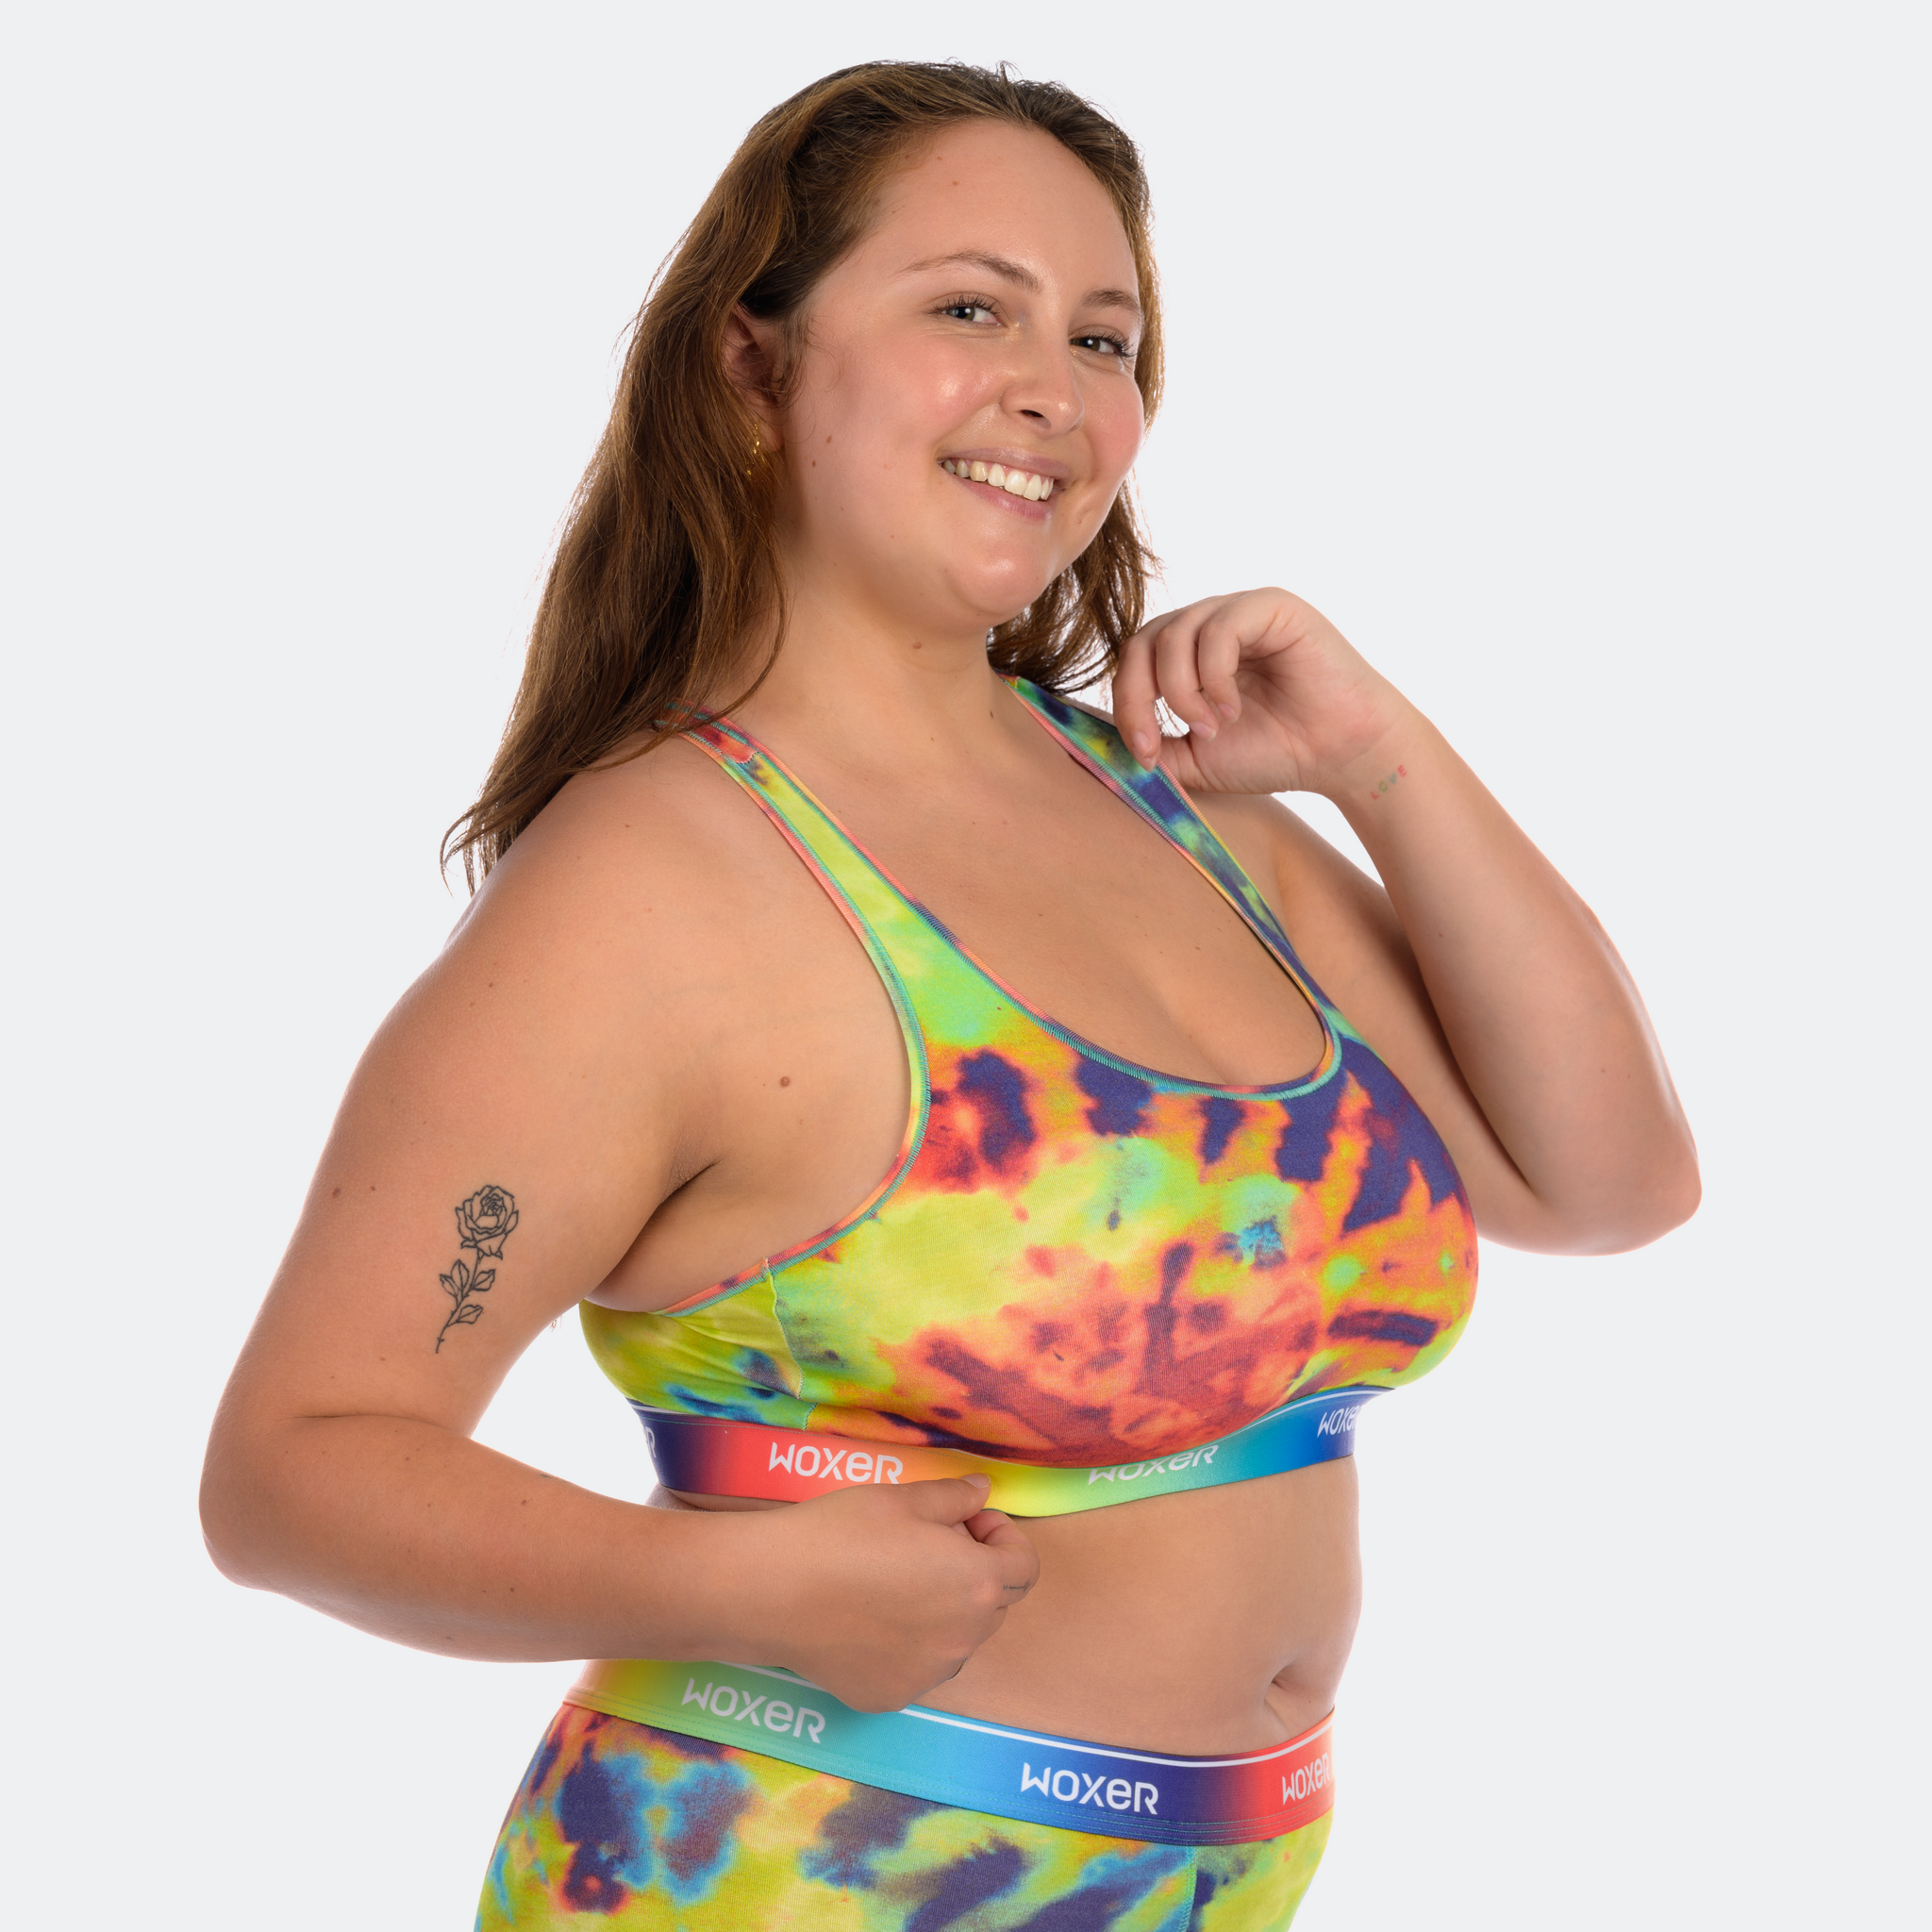 Boss Heritage Colorblock, Stretchy Seamless Sports Bras